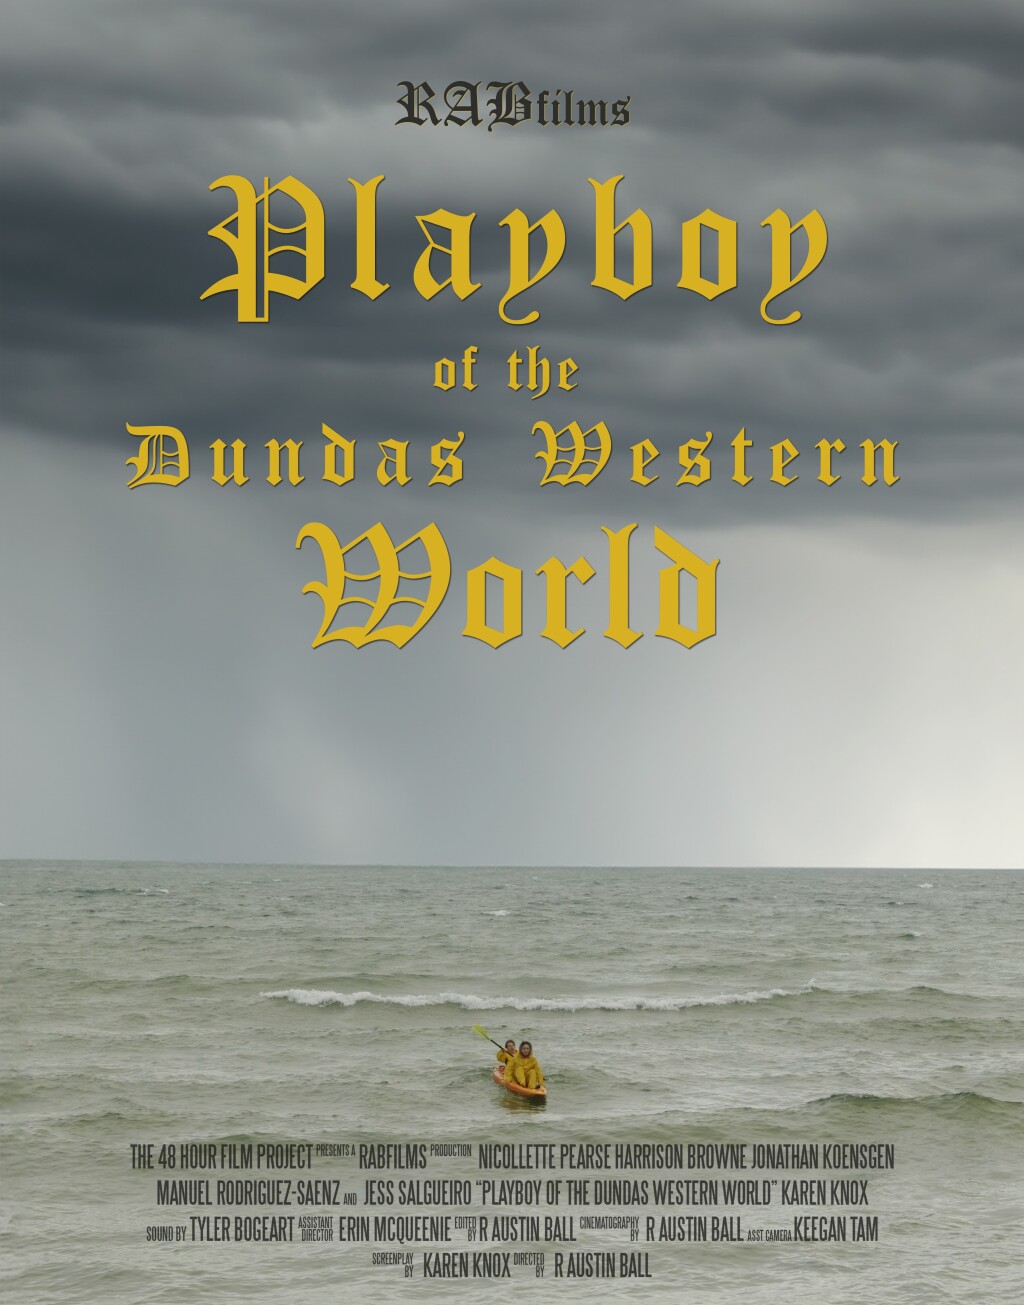 Filmposter for Playboy of the Dundas Western World